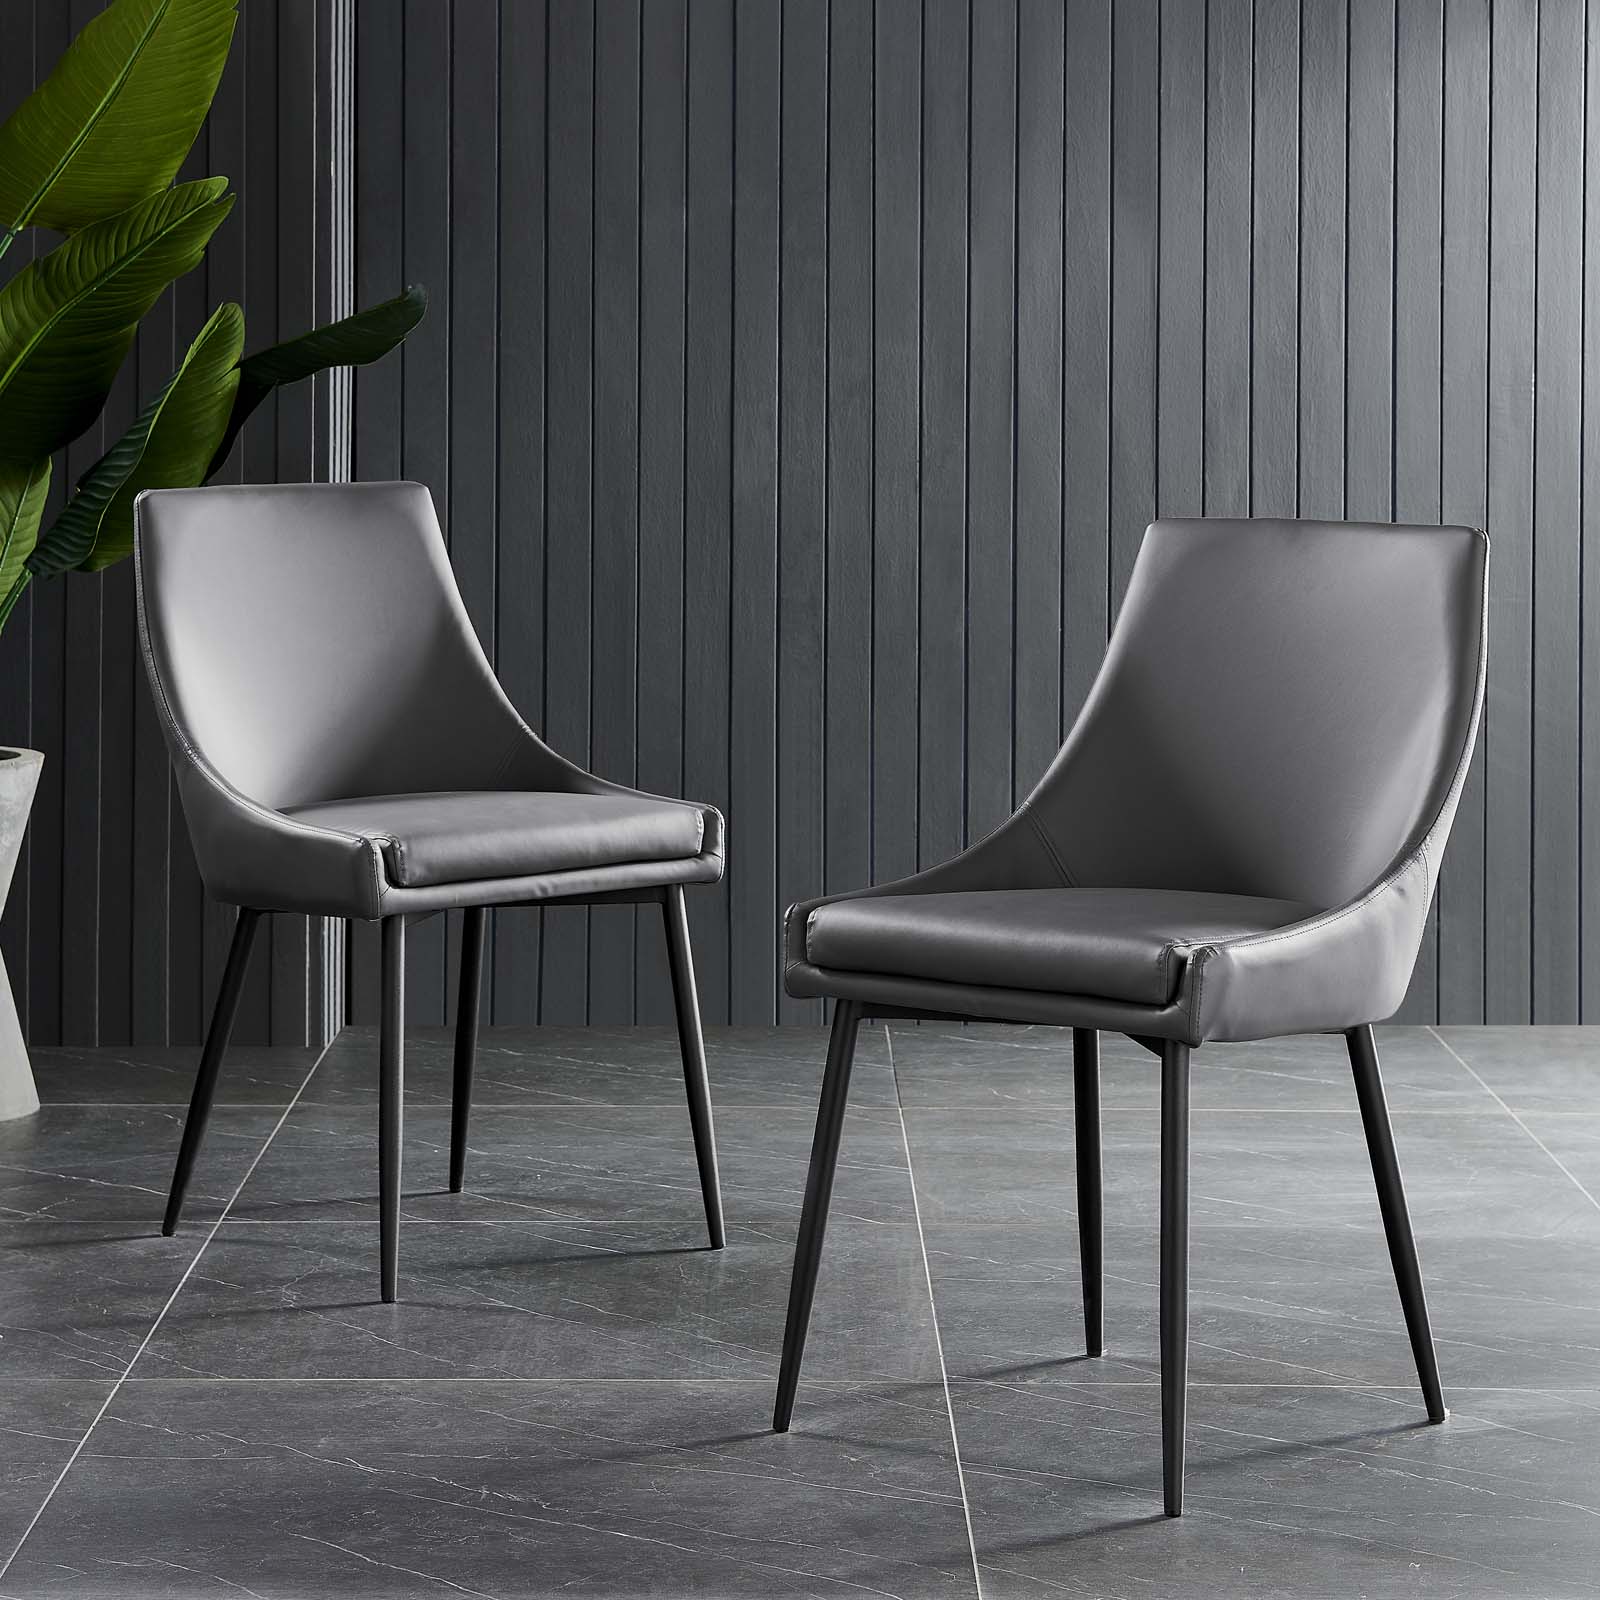 Viscount Vegan Leather Dining Chairs - Set of 2